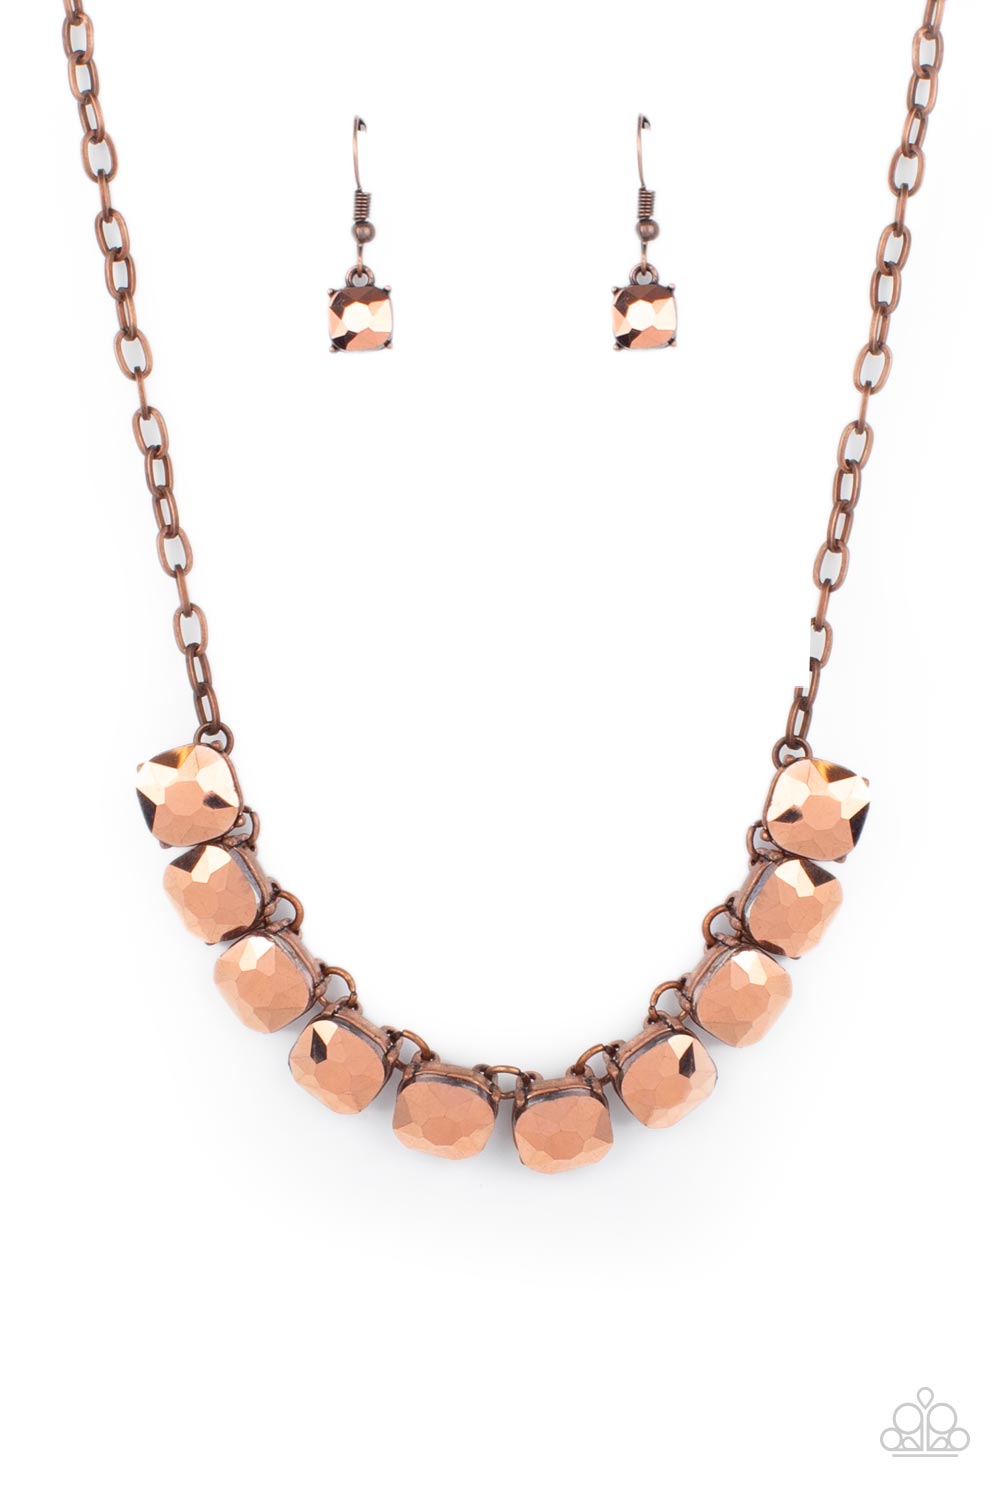 five-dollar-jewelry-radiance-squared-copper-necklace-paparazzi-accessories